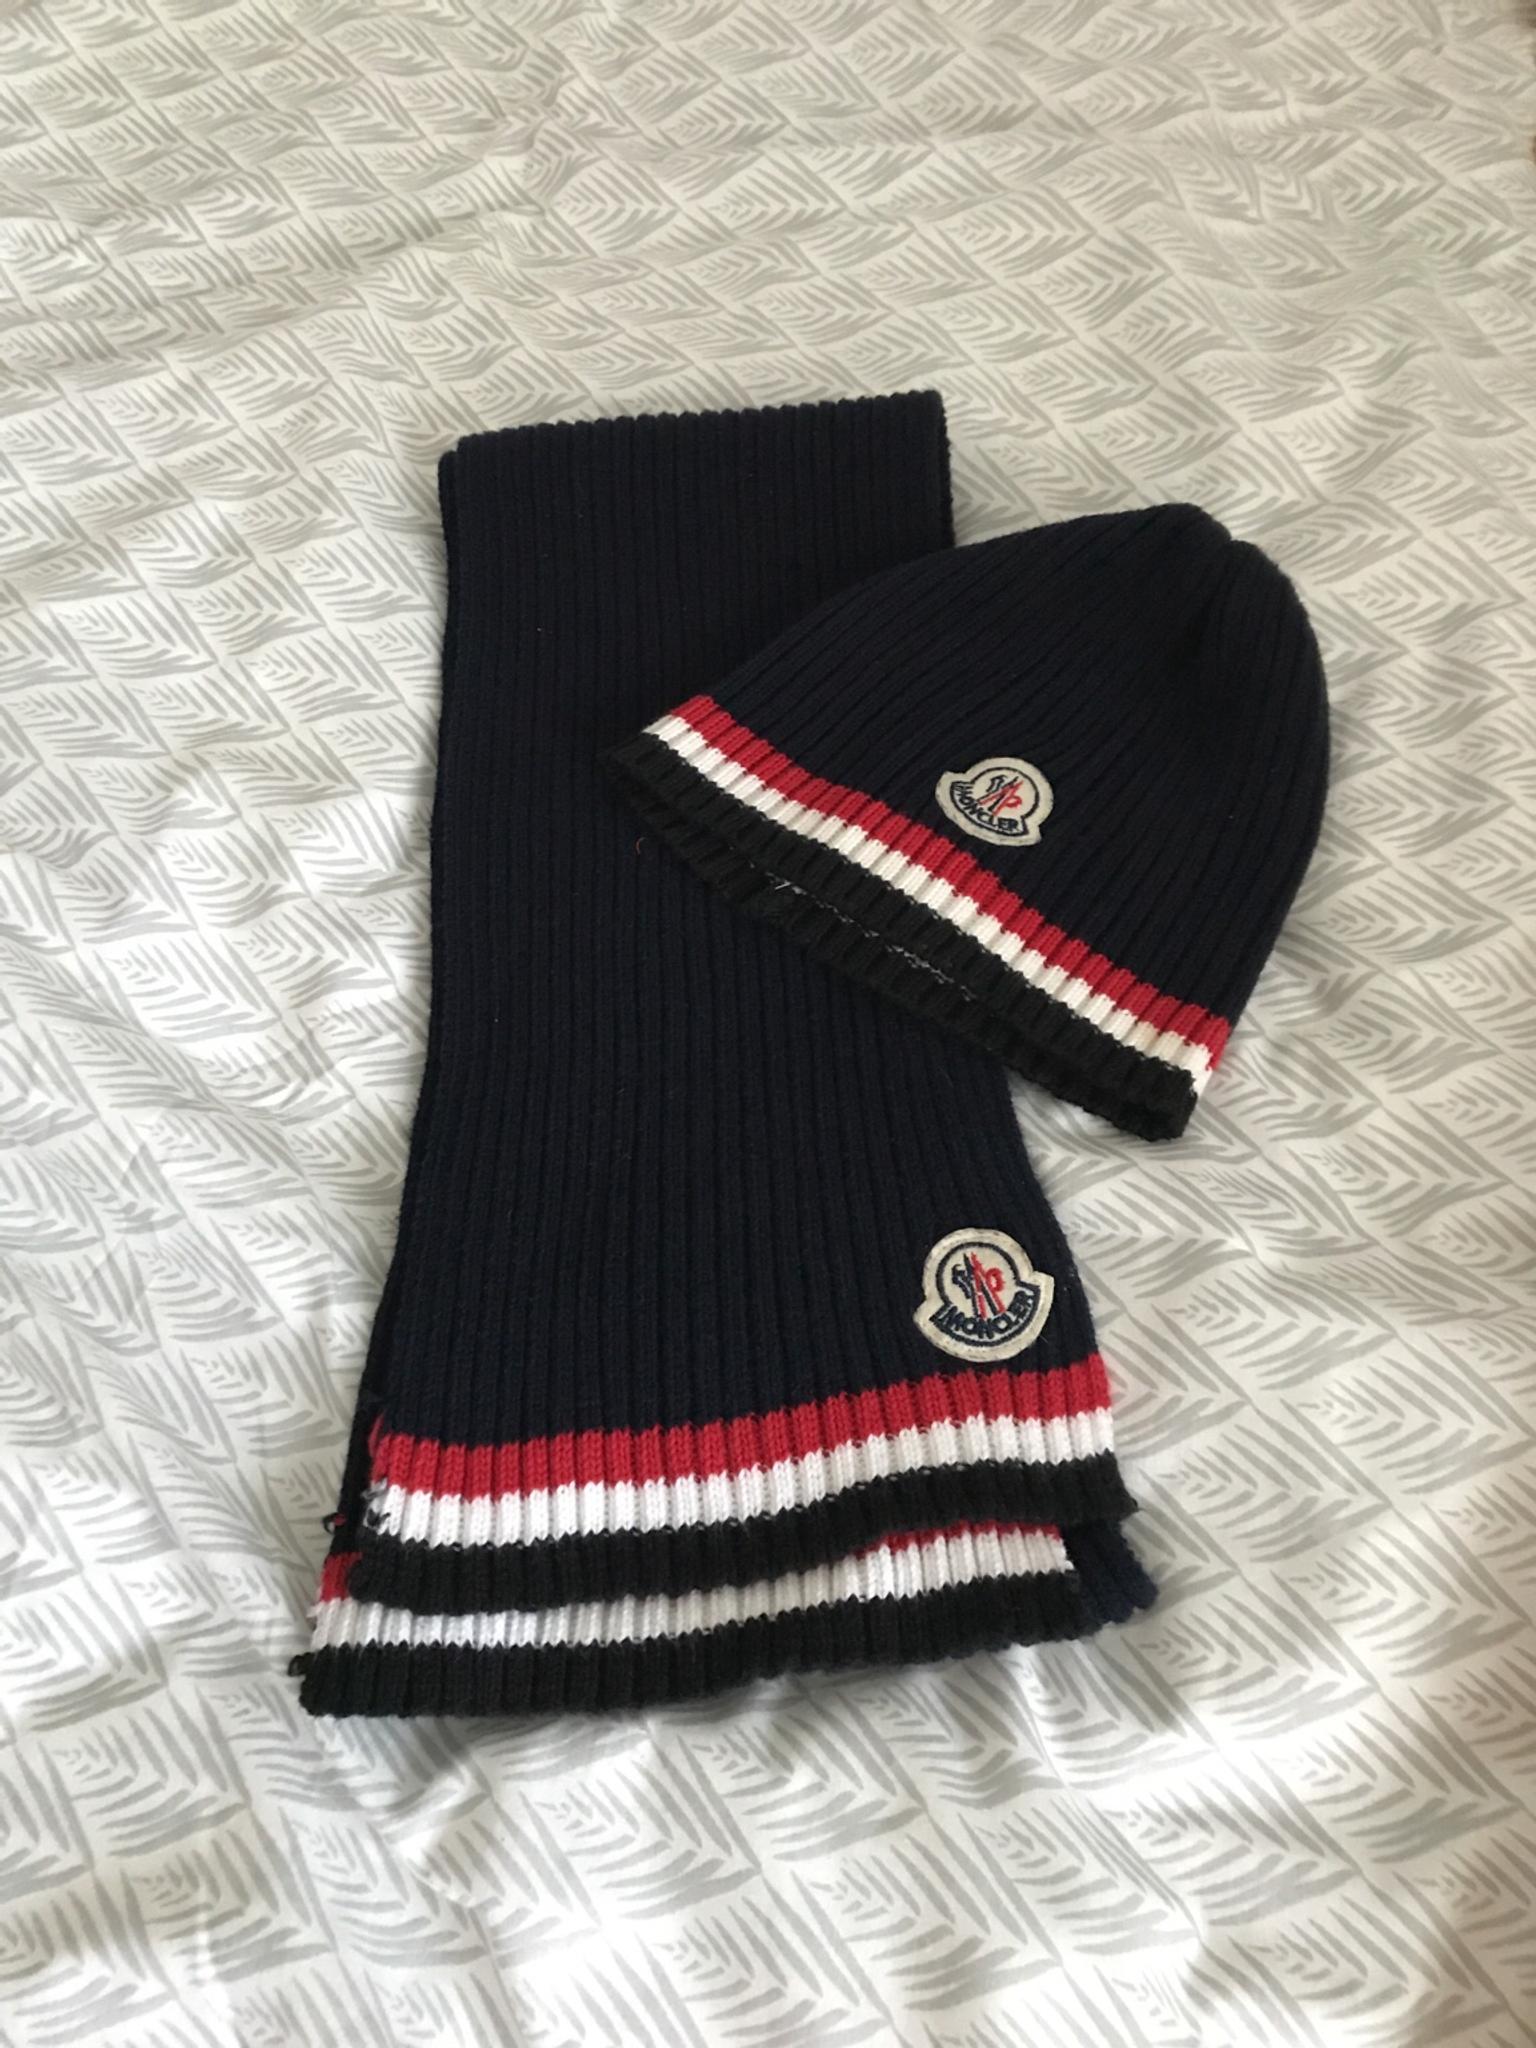 Moncler hat and scarf in Knowsley for 